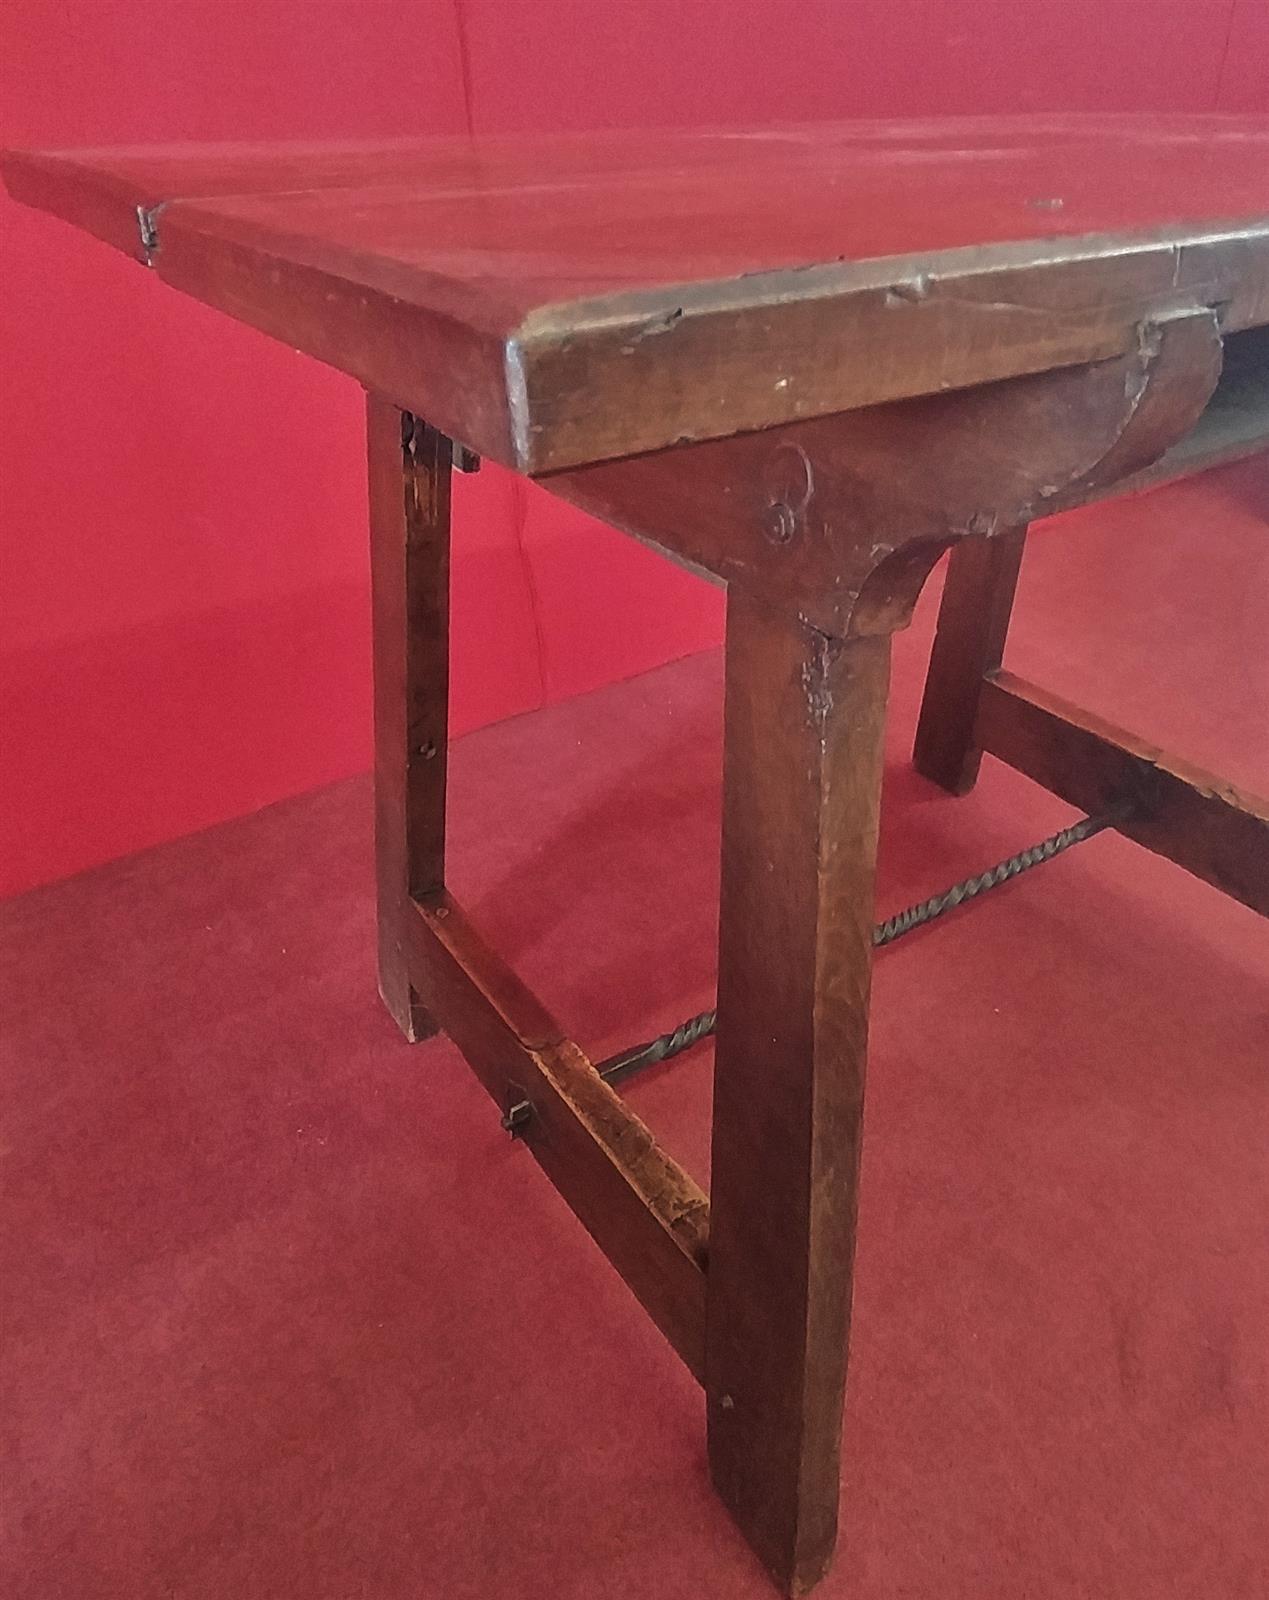 Small writing table from the end of the 17th century